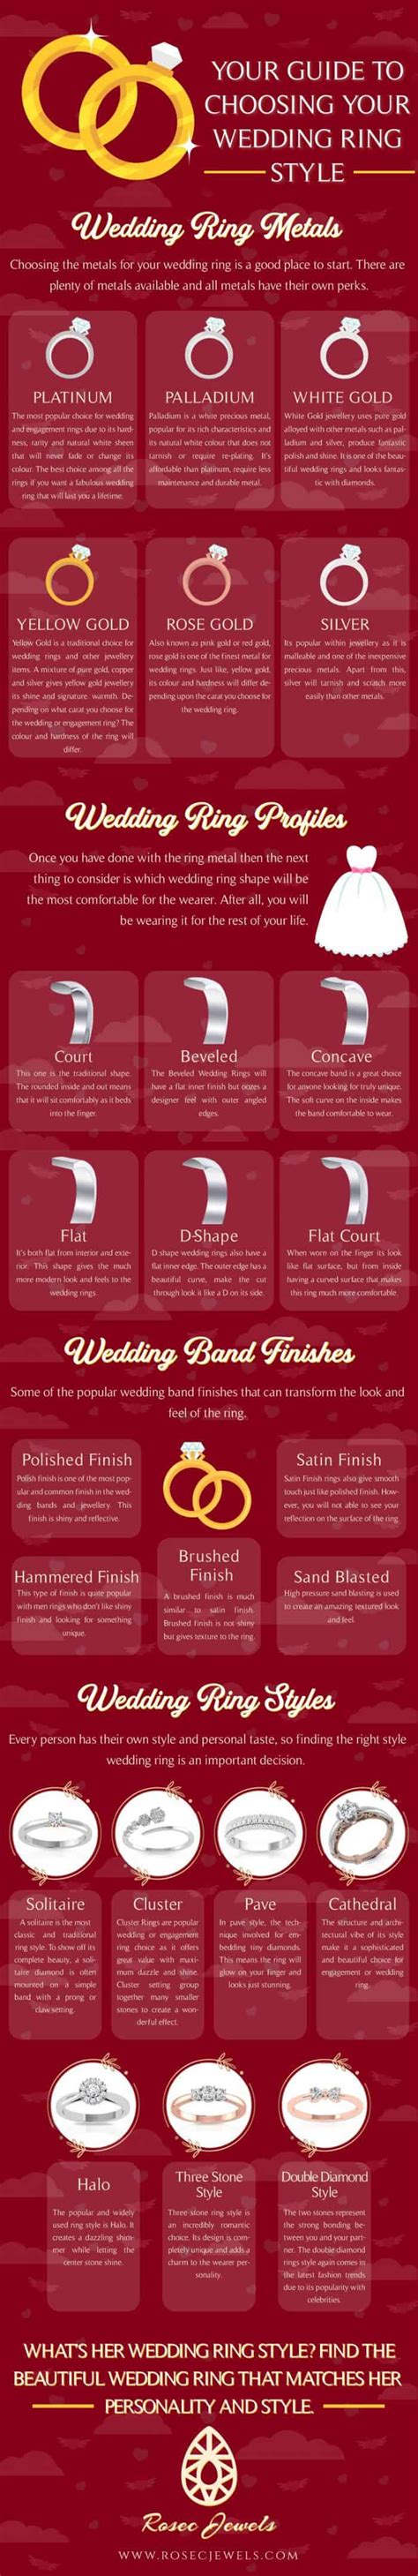 A Jewelers Guide To Wedding Rings Daily Infographic